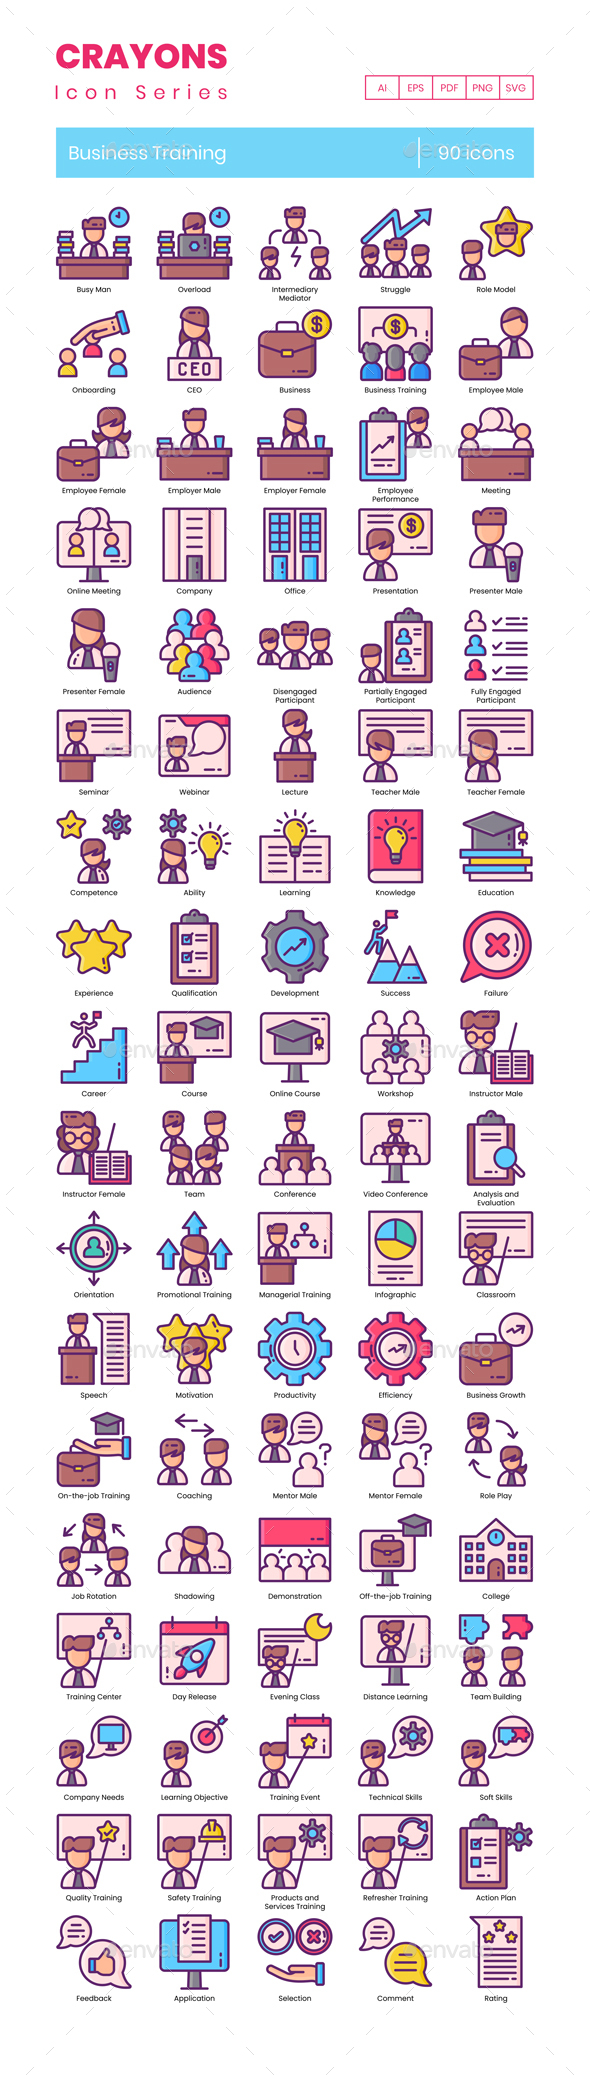 [DOWNLOAD]90 Business Training Icons | Crayons Series